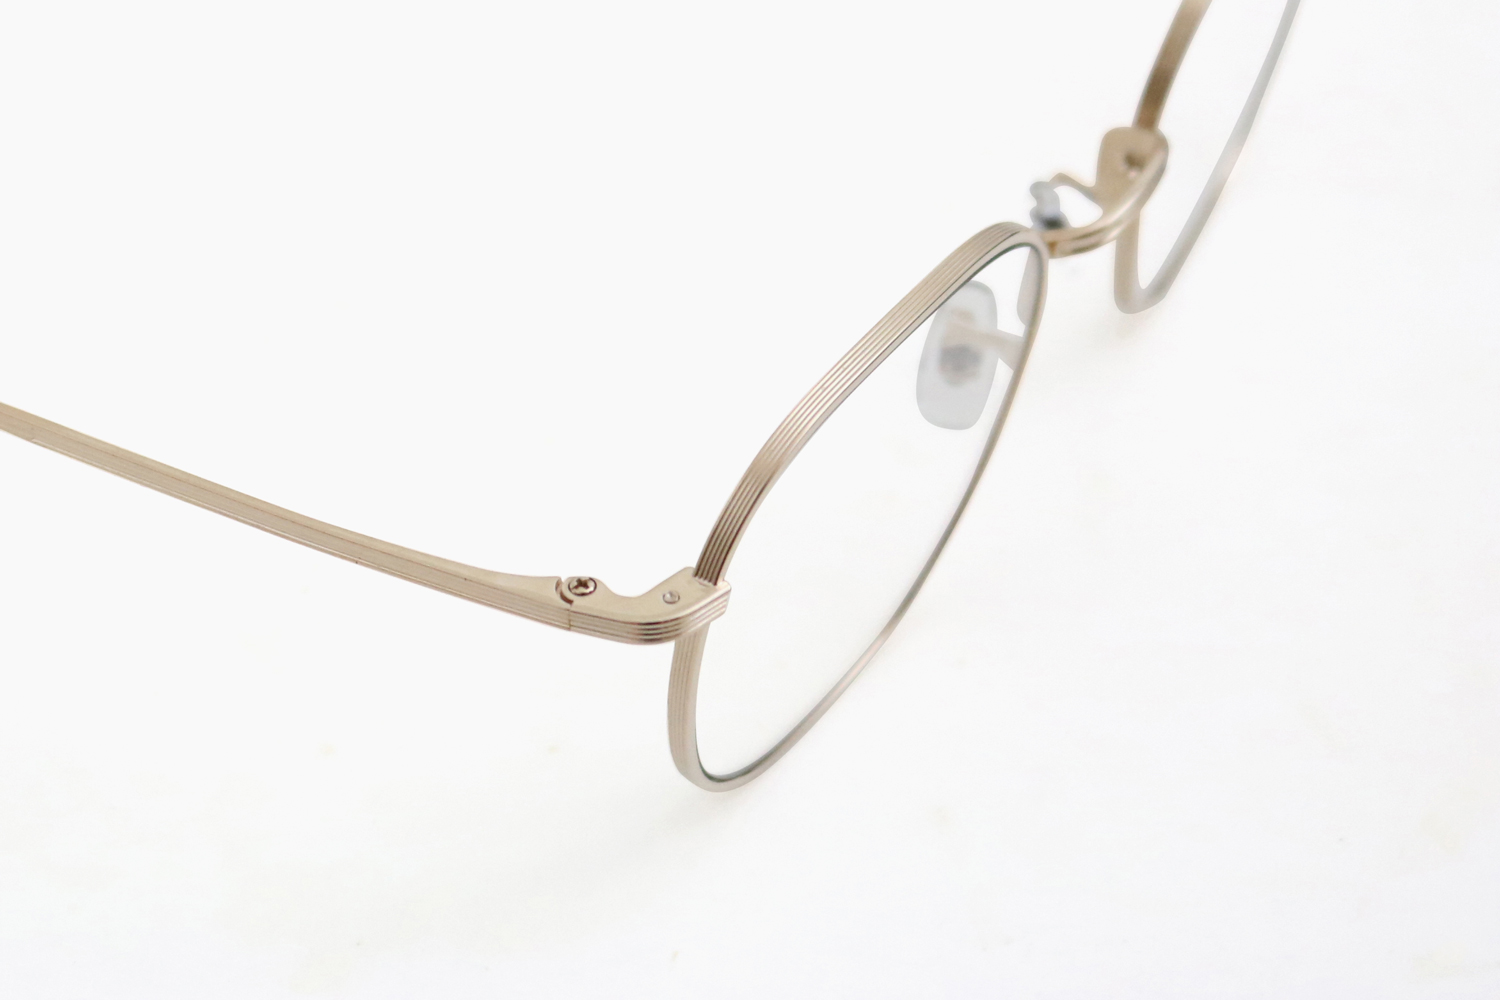 OLIVER PEOPLES THE ROW｜BOARDMEETING 2-02 OV1230ST - 52921W｜OLIVER PEOPLES